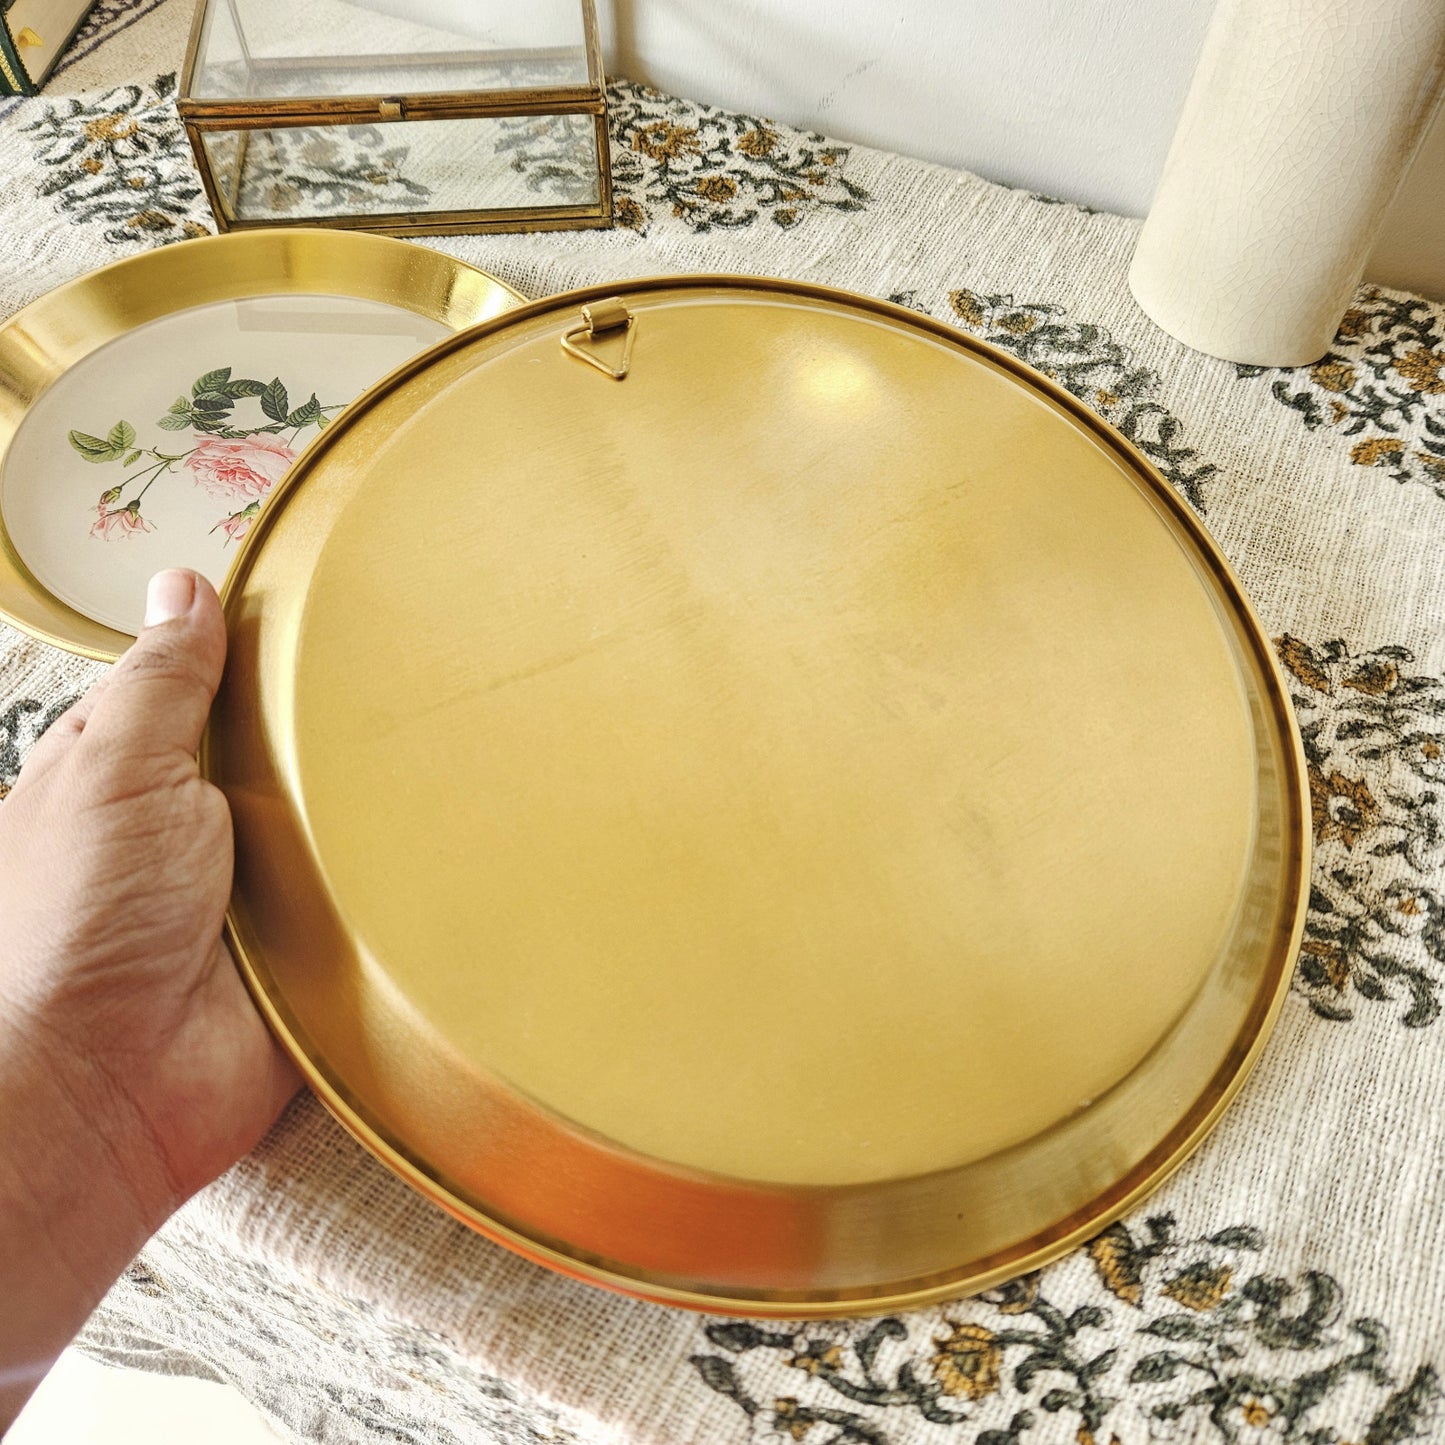 Gold Rim Botanical Decor Plate with wooden stand